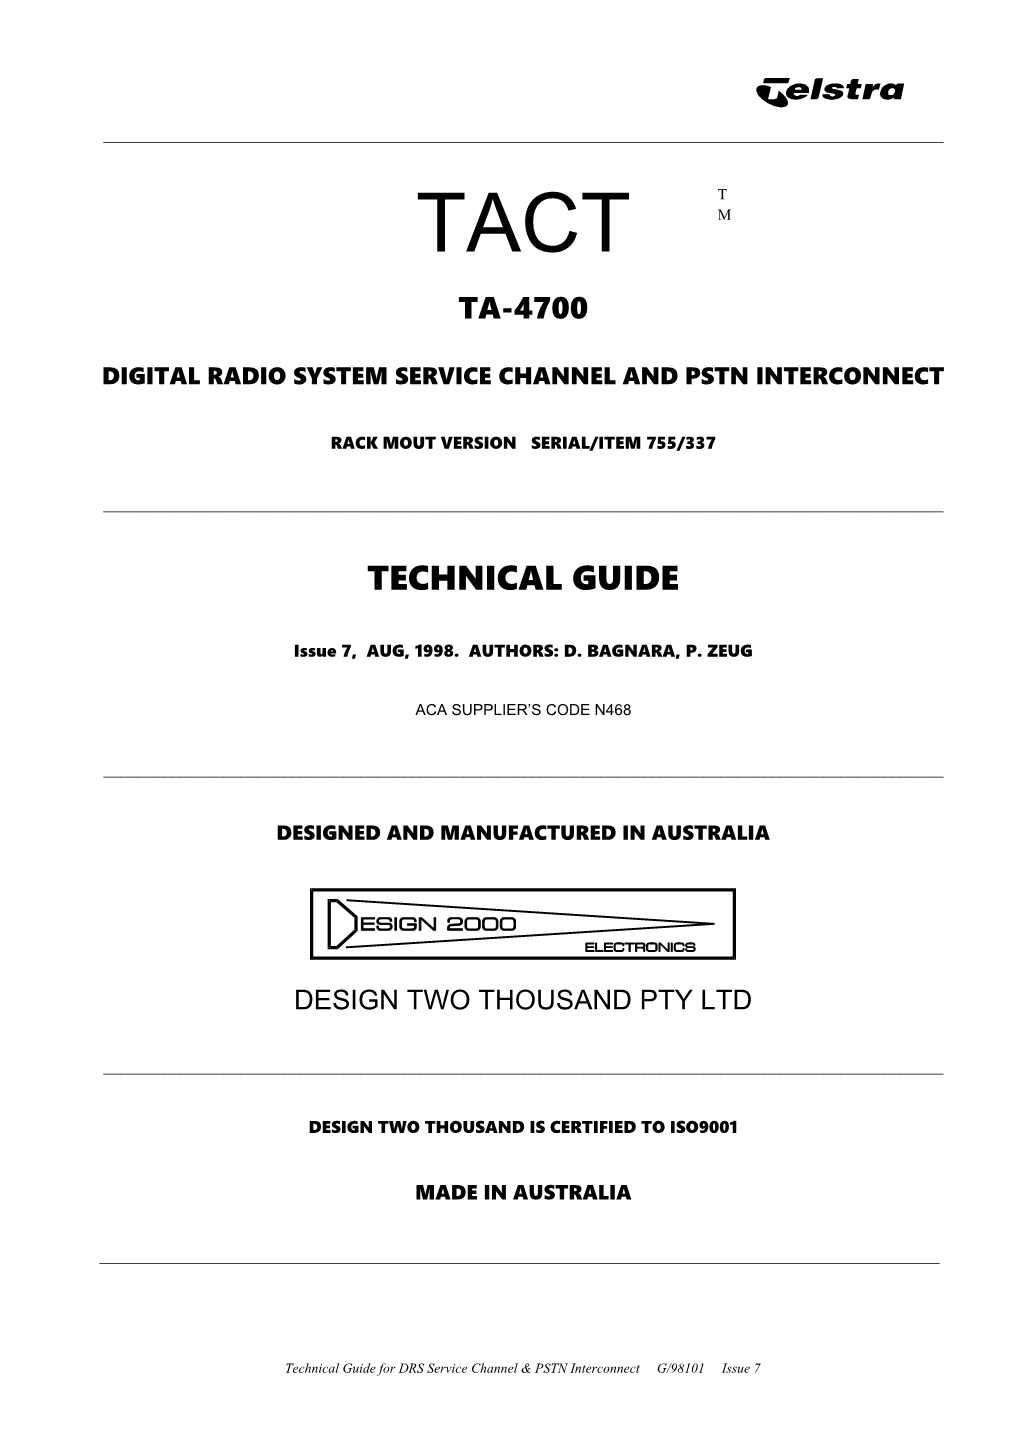 Digital Radio System Service Channel and Pstn Interconnect